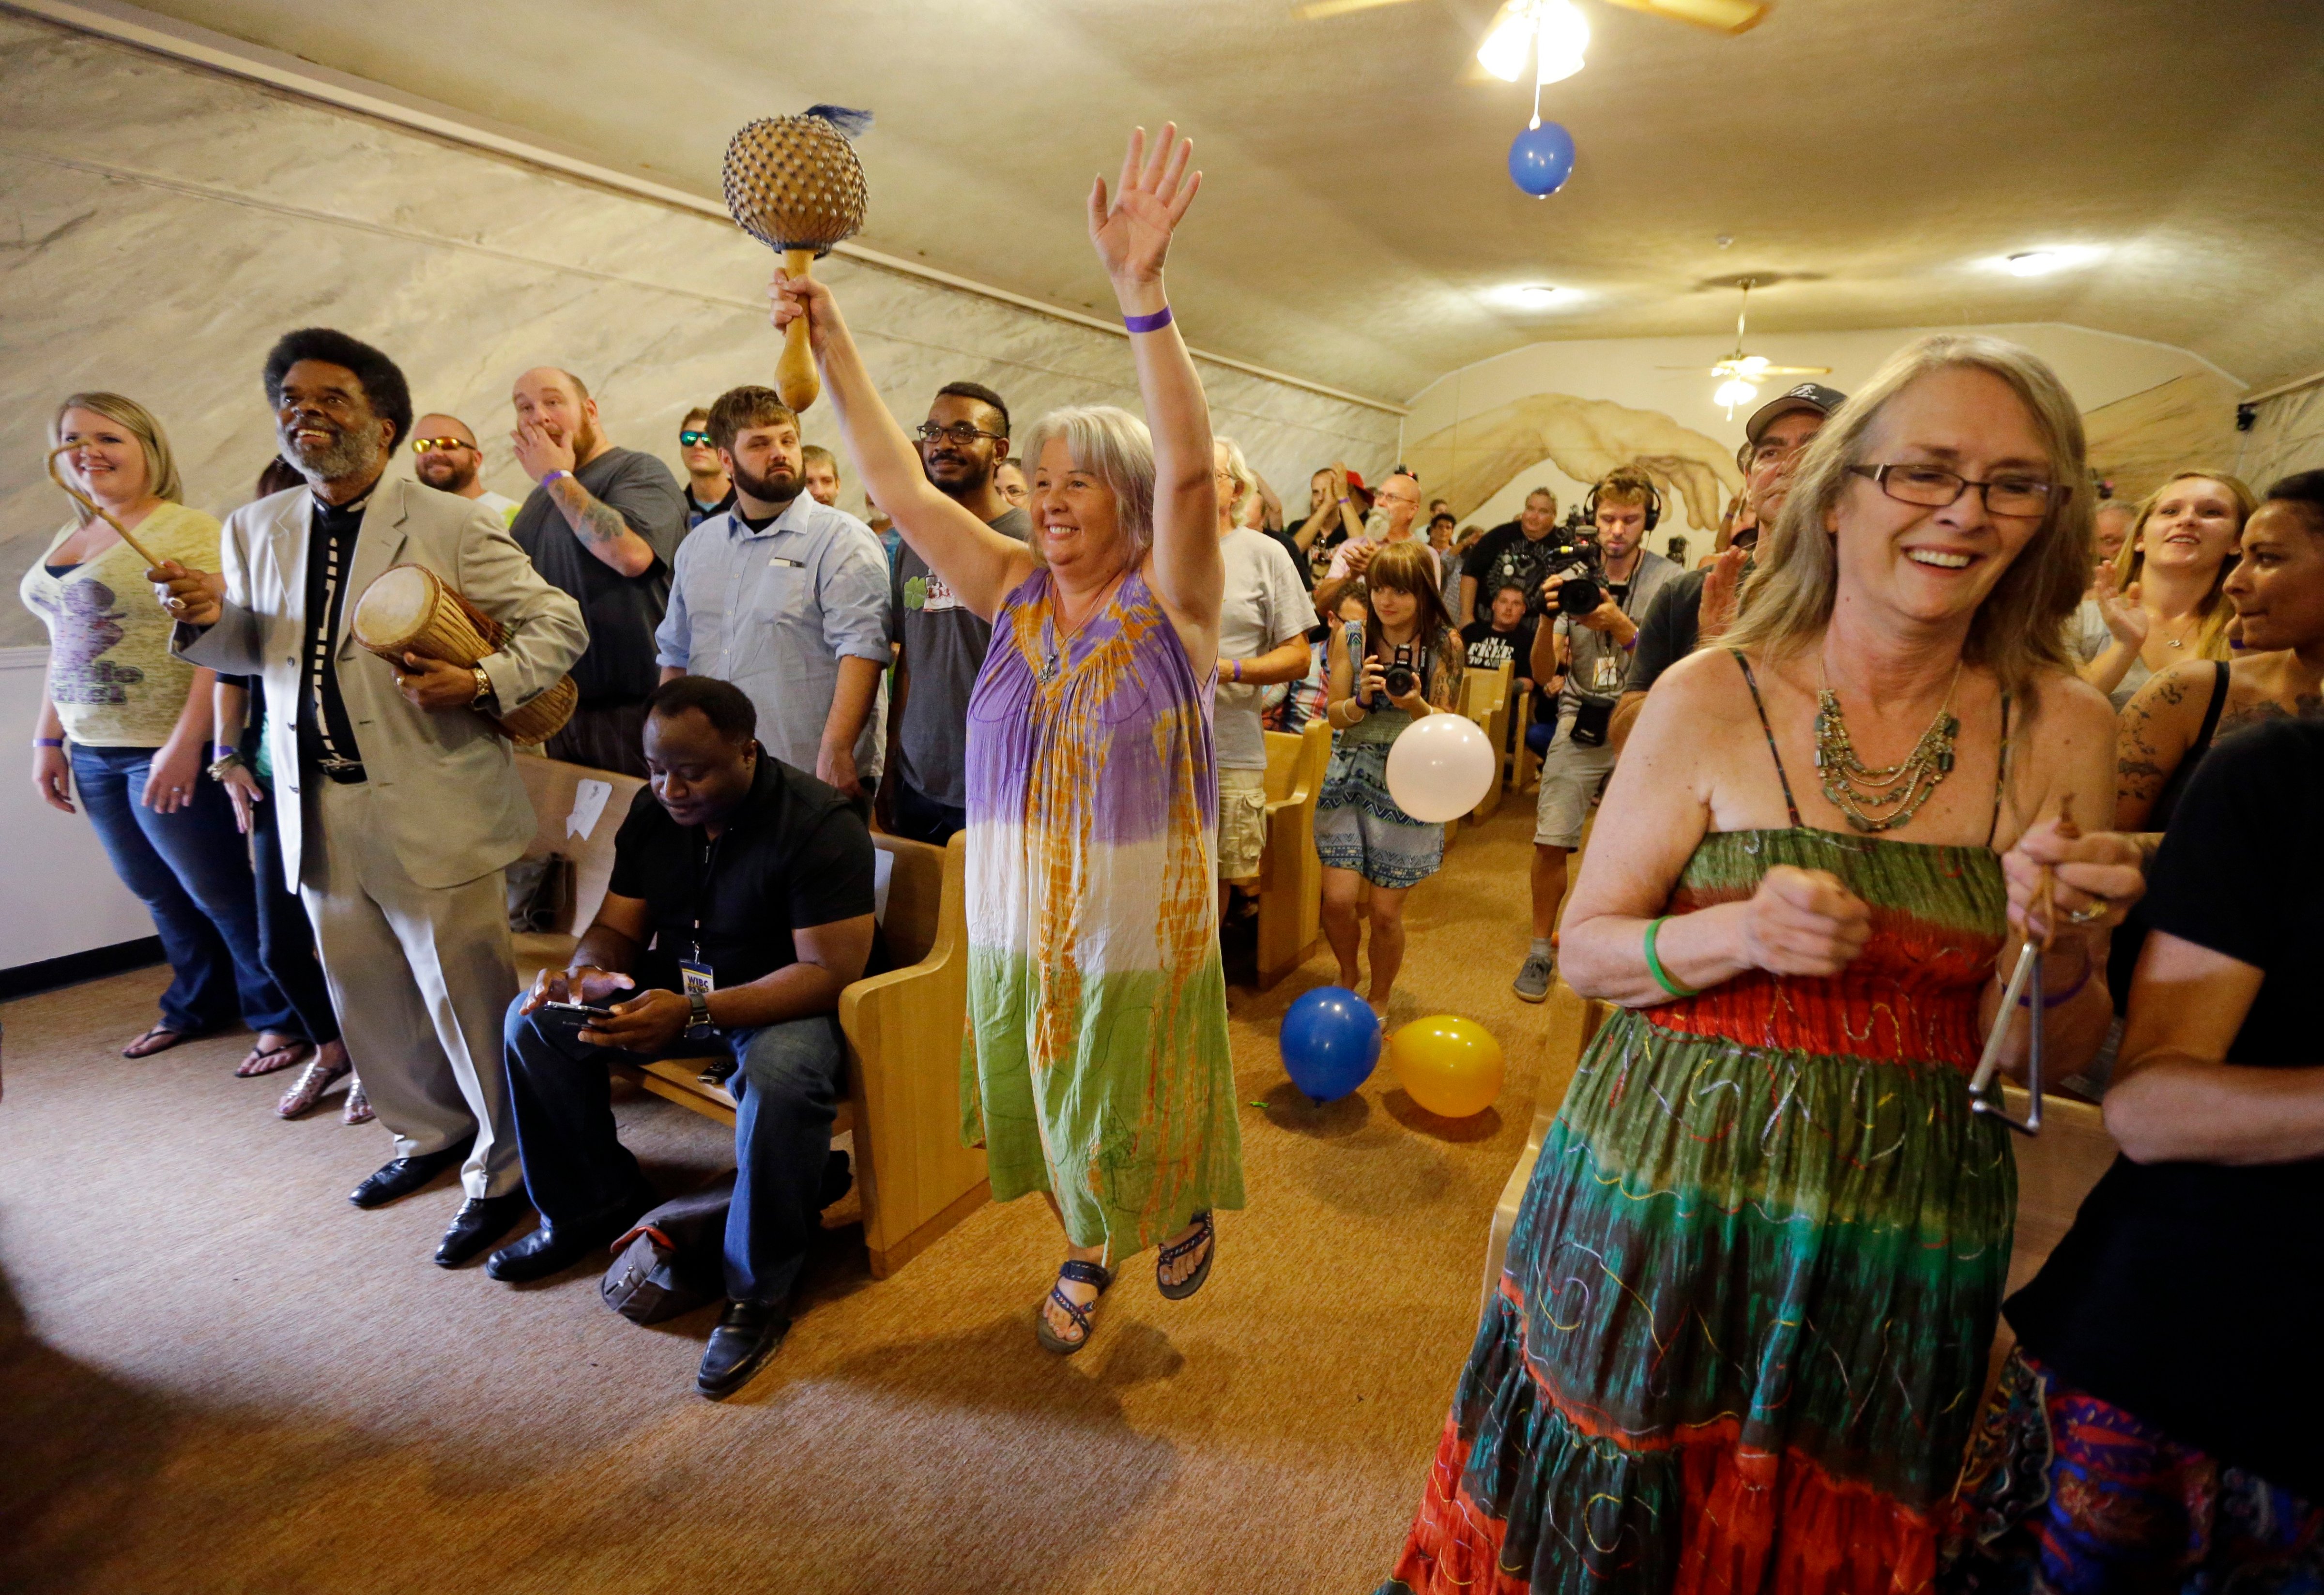 Members of the congregation at the First Church of Cannabis sing and dance during the church's first service on July 1, 2015, in Indianapolis (Michael Conroy—AP)